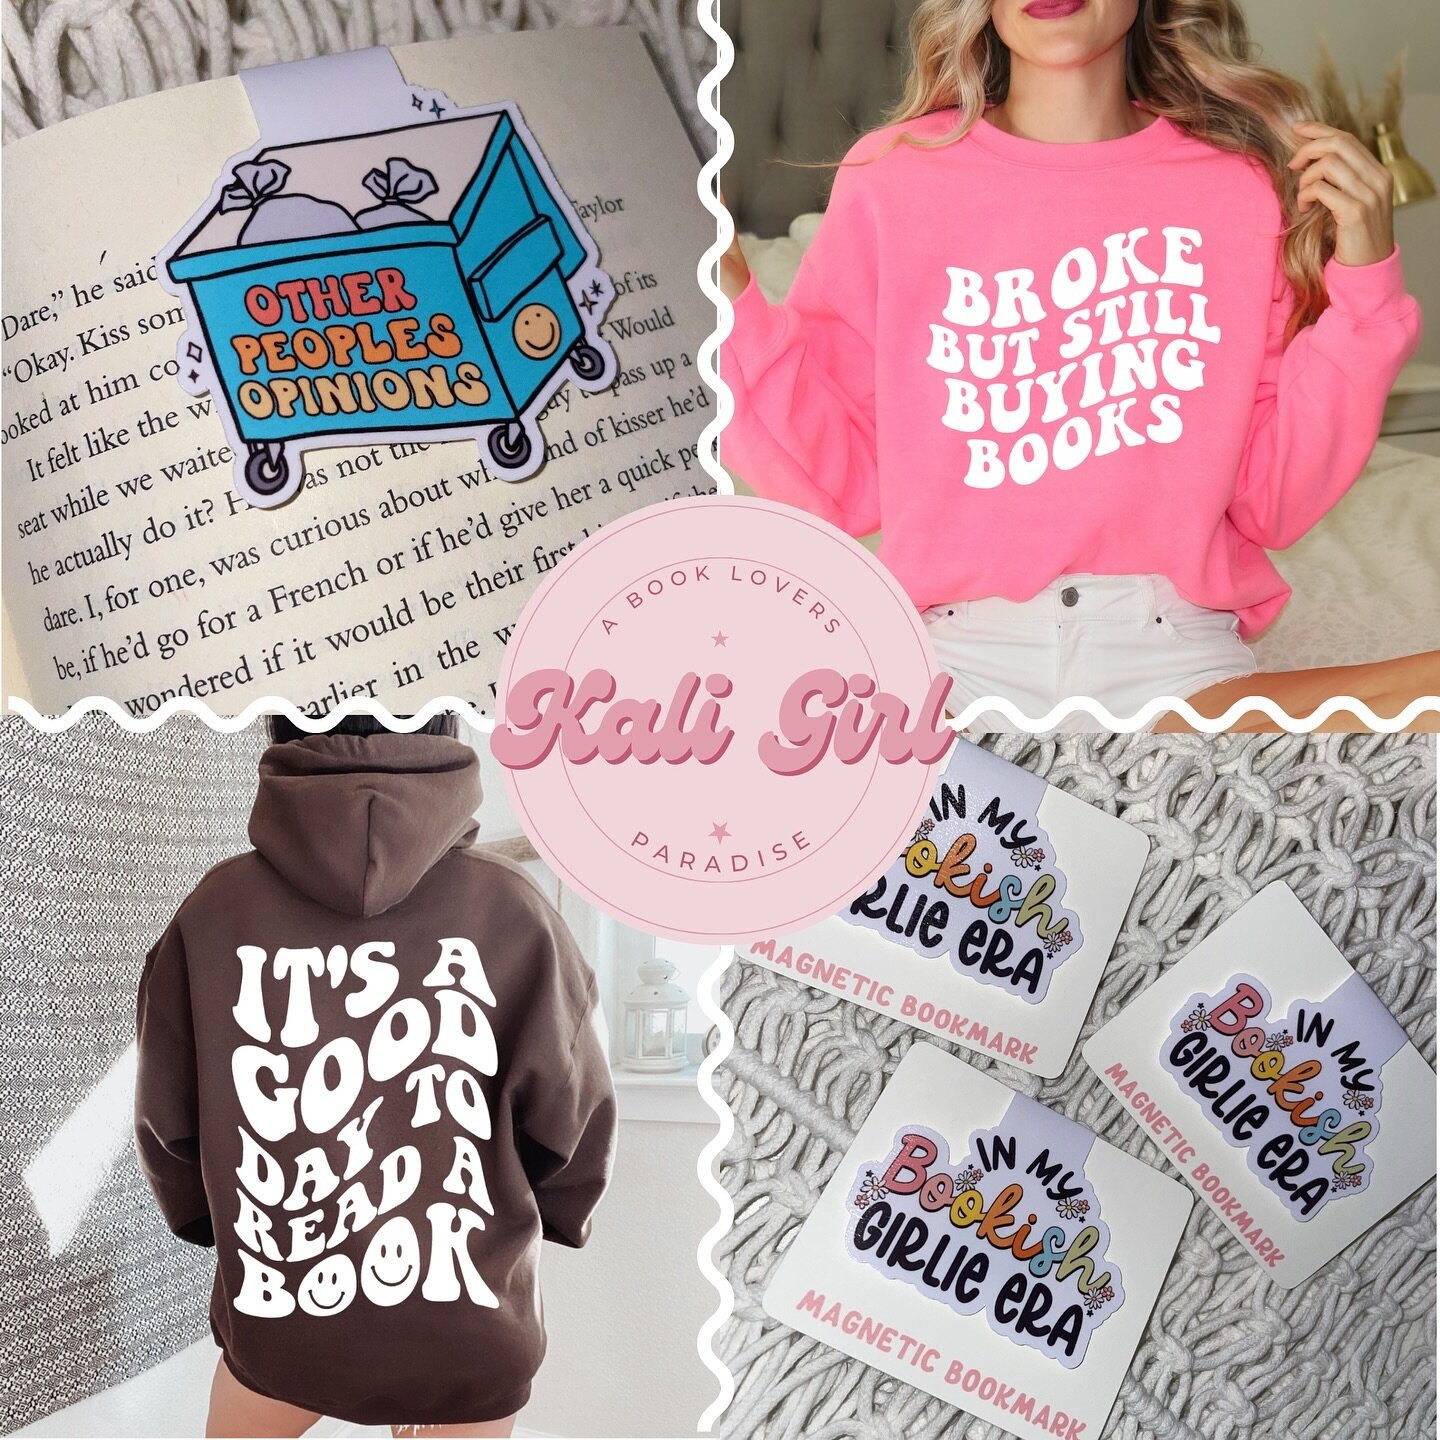 EEK!! 🤭 A teeny tiny sneak peek of some of the cutest book merch that will be on our website soon!!! 🤍 Book marks, apparel, stickers and soo much more!! 🤩 I am working super hard to get our website ready and will have our launch date posted soon!!